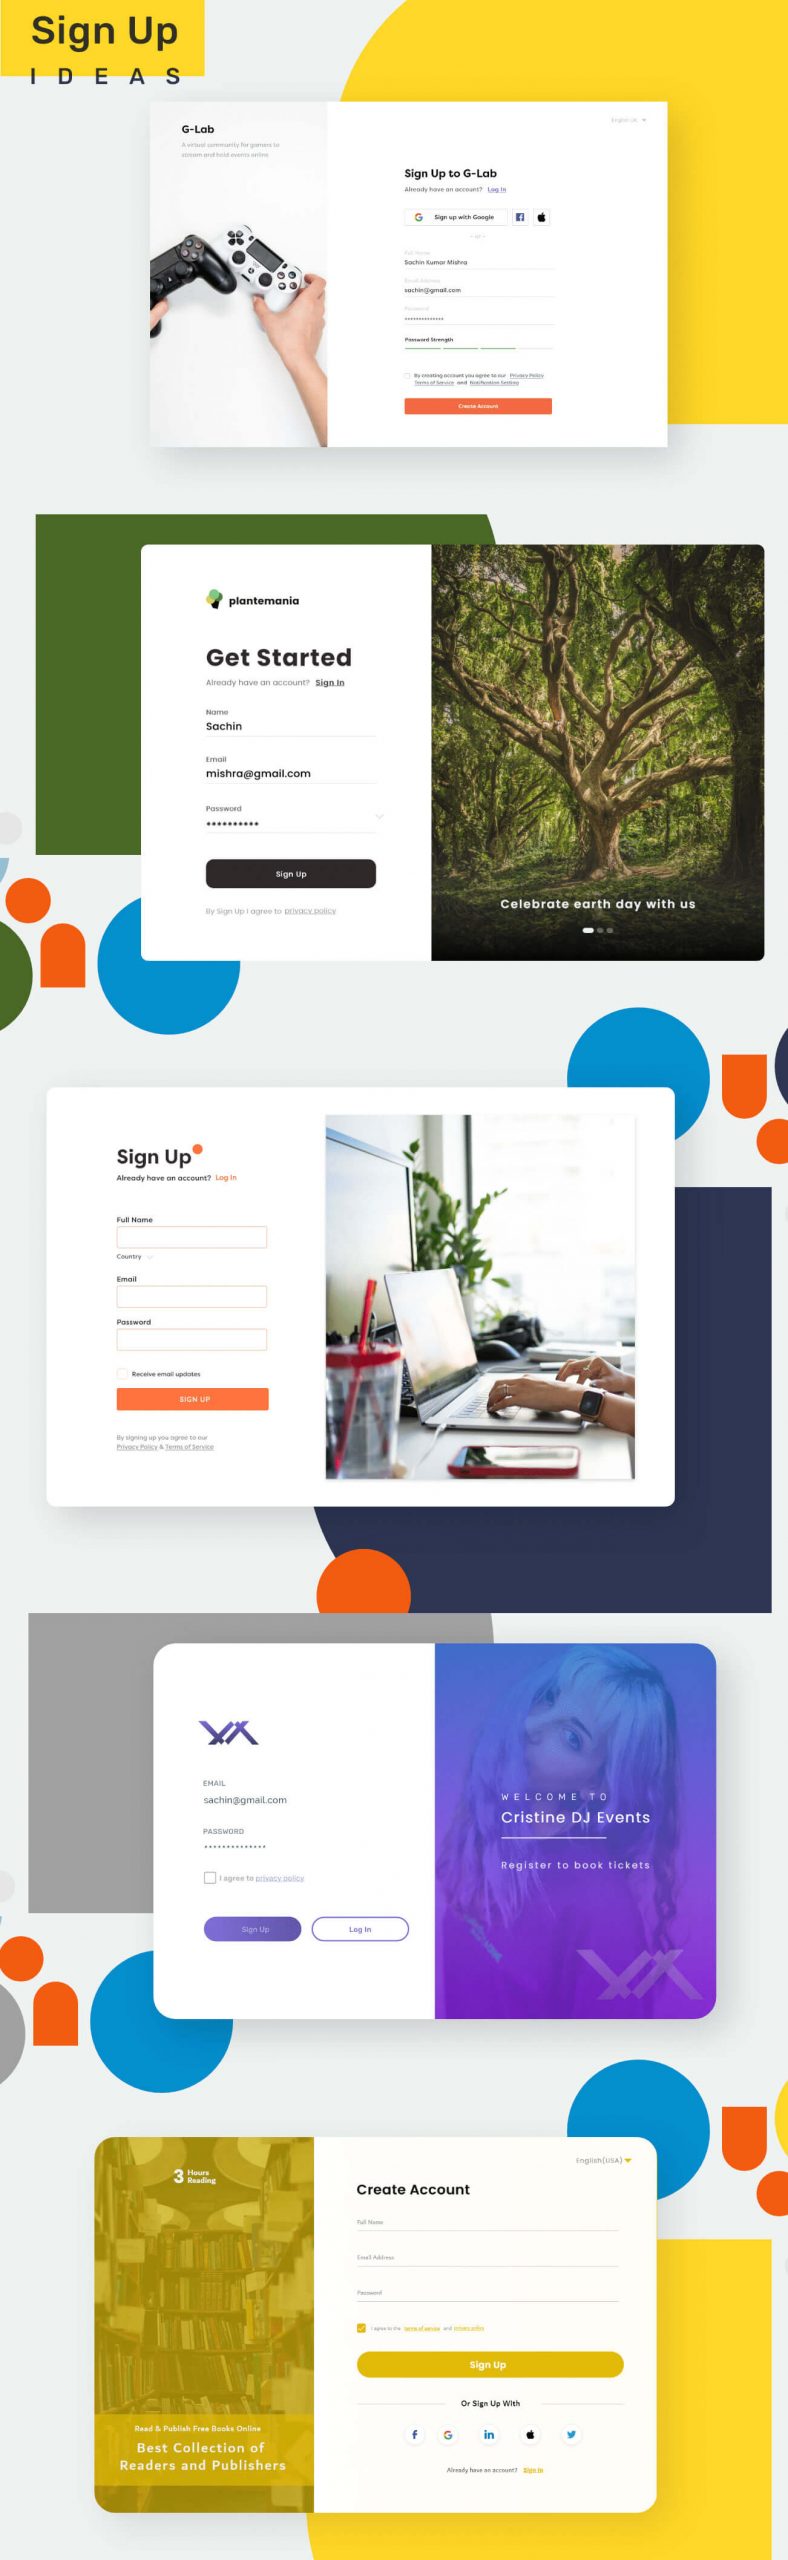 5 Sign Up Pages Templates For Adobe XD